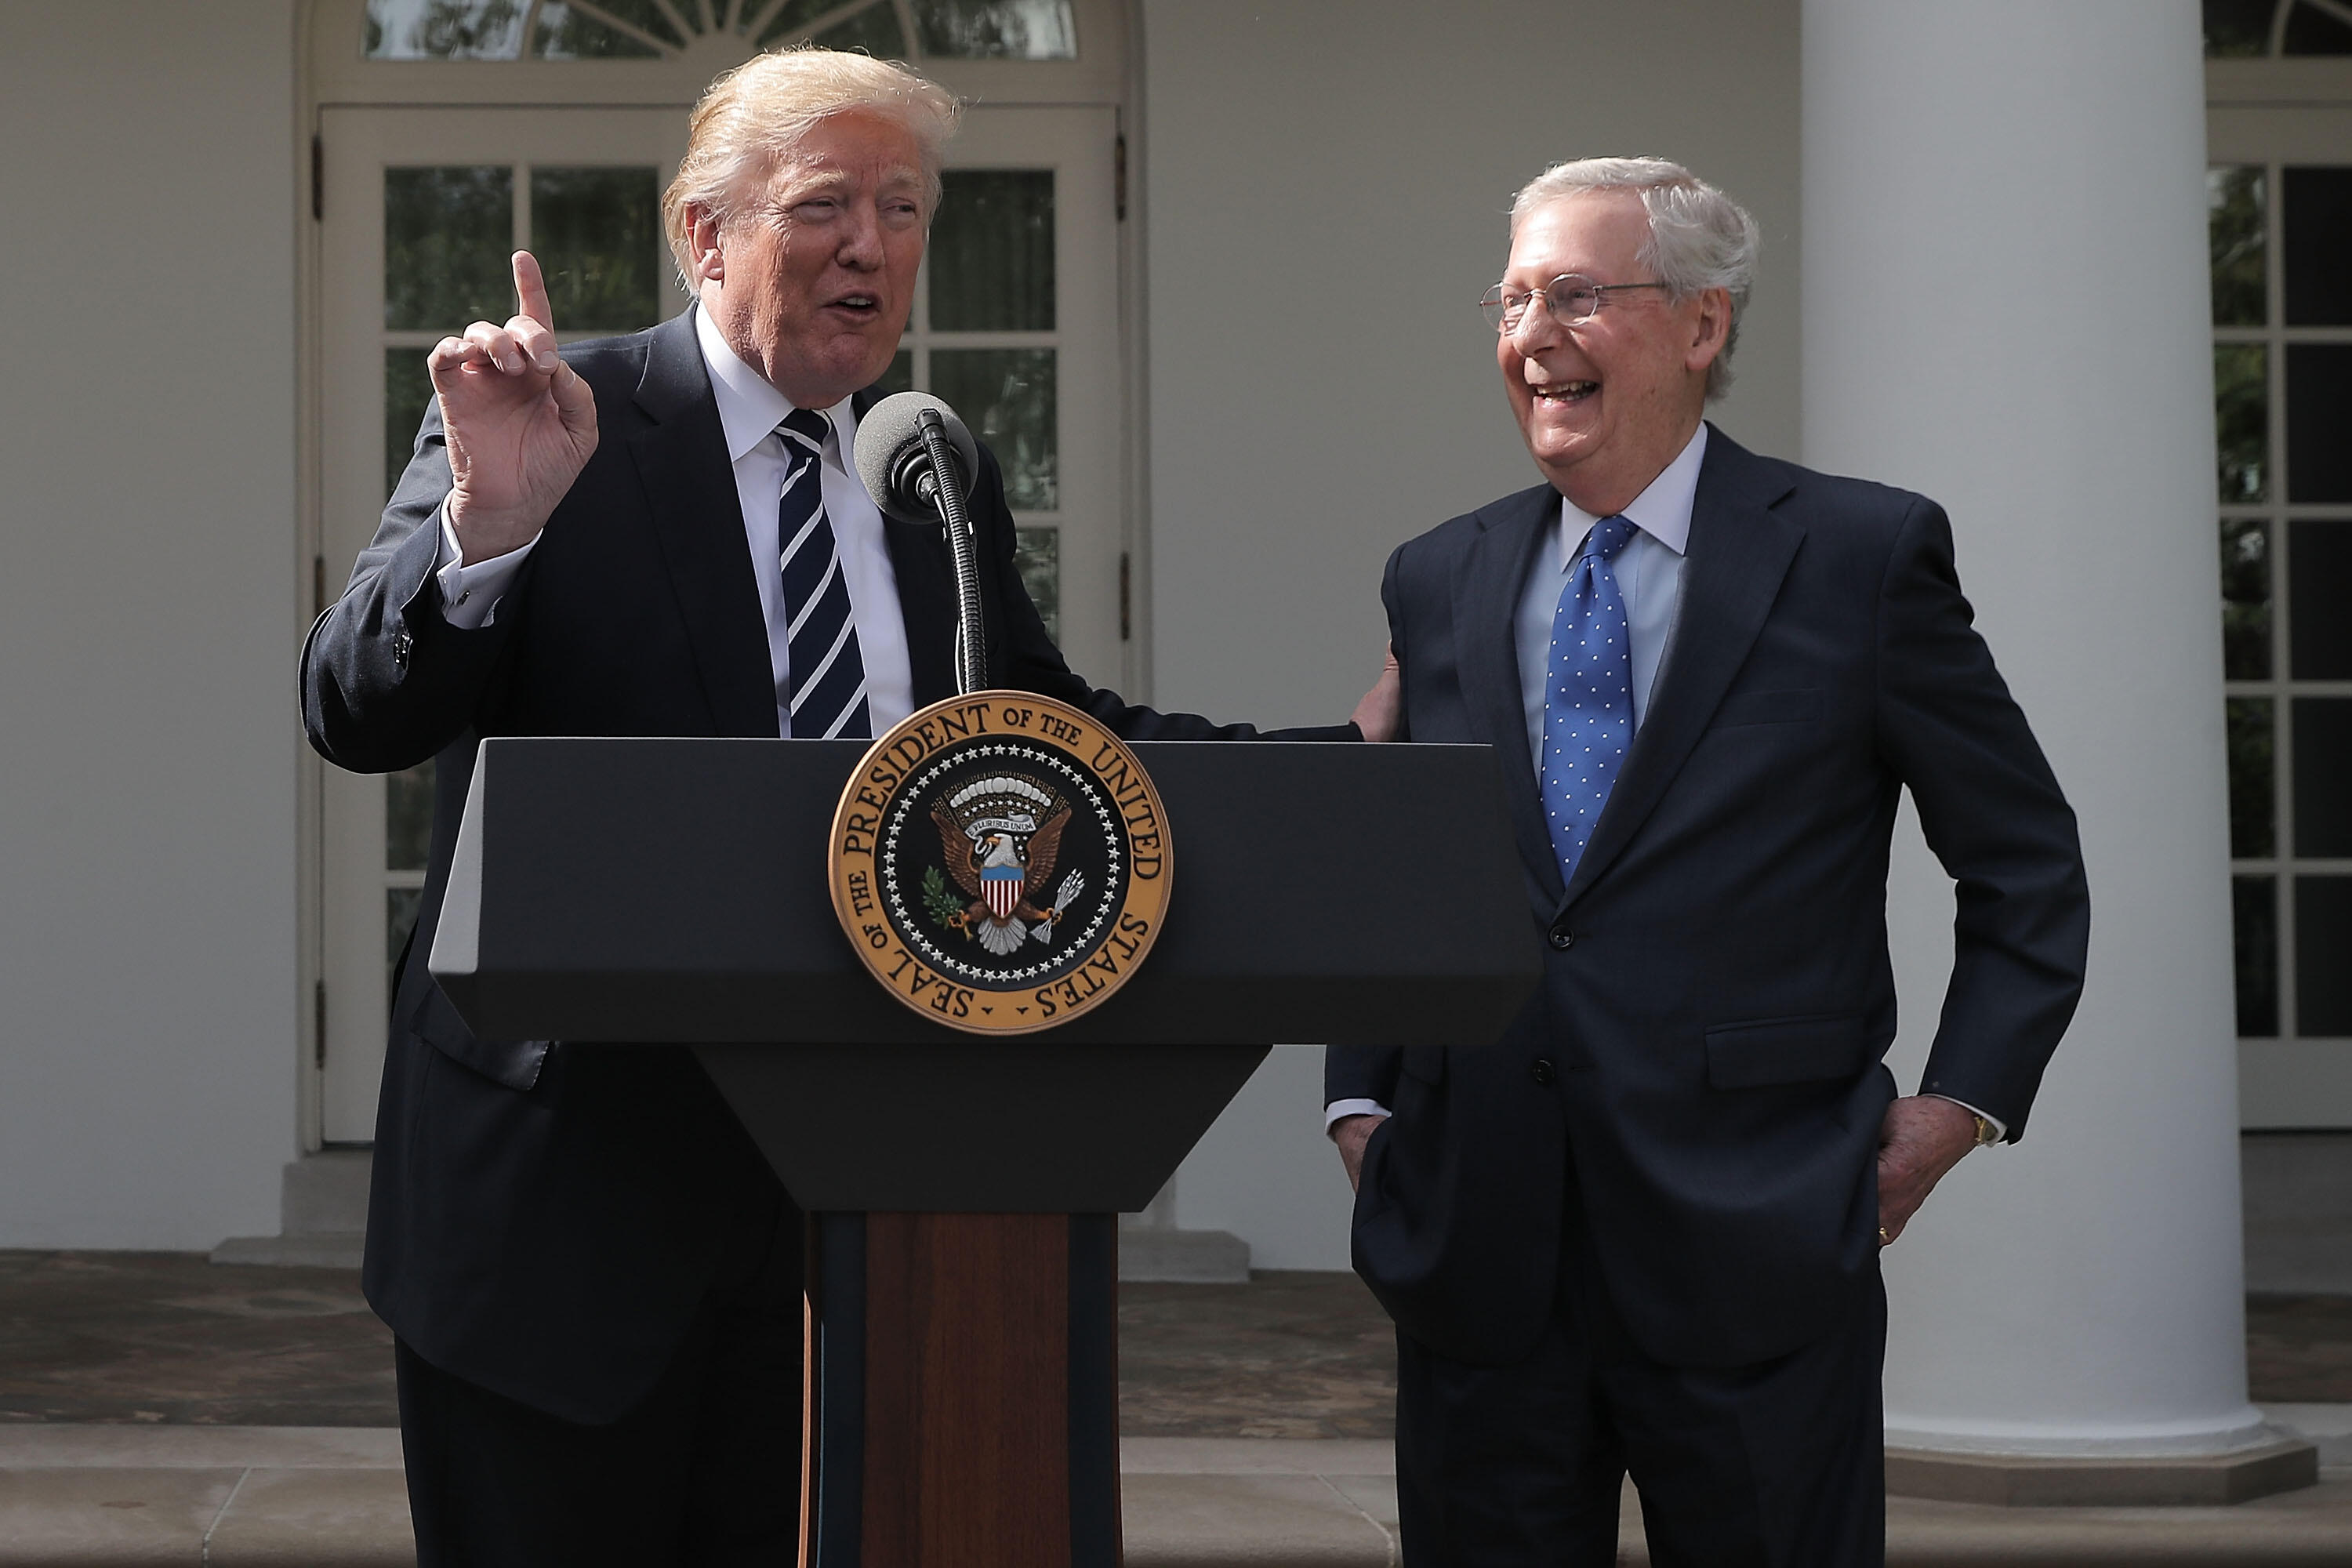 WASHINGTON, DC - OCTOBER 16: U.S. President Donald Trump (L) and Senate Majority Leader Mitch McConnell (R-KY) talk to reporters in the Rose Garden following a lunch meeting at the White House October 16, 2017, in Washington, DC. Trump and McConnell tried to erase reporting that they were not on the same page with the GOP legislative agenda and priorities. (Photo by Chip Somodevilla/Getty Images)